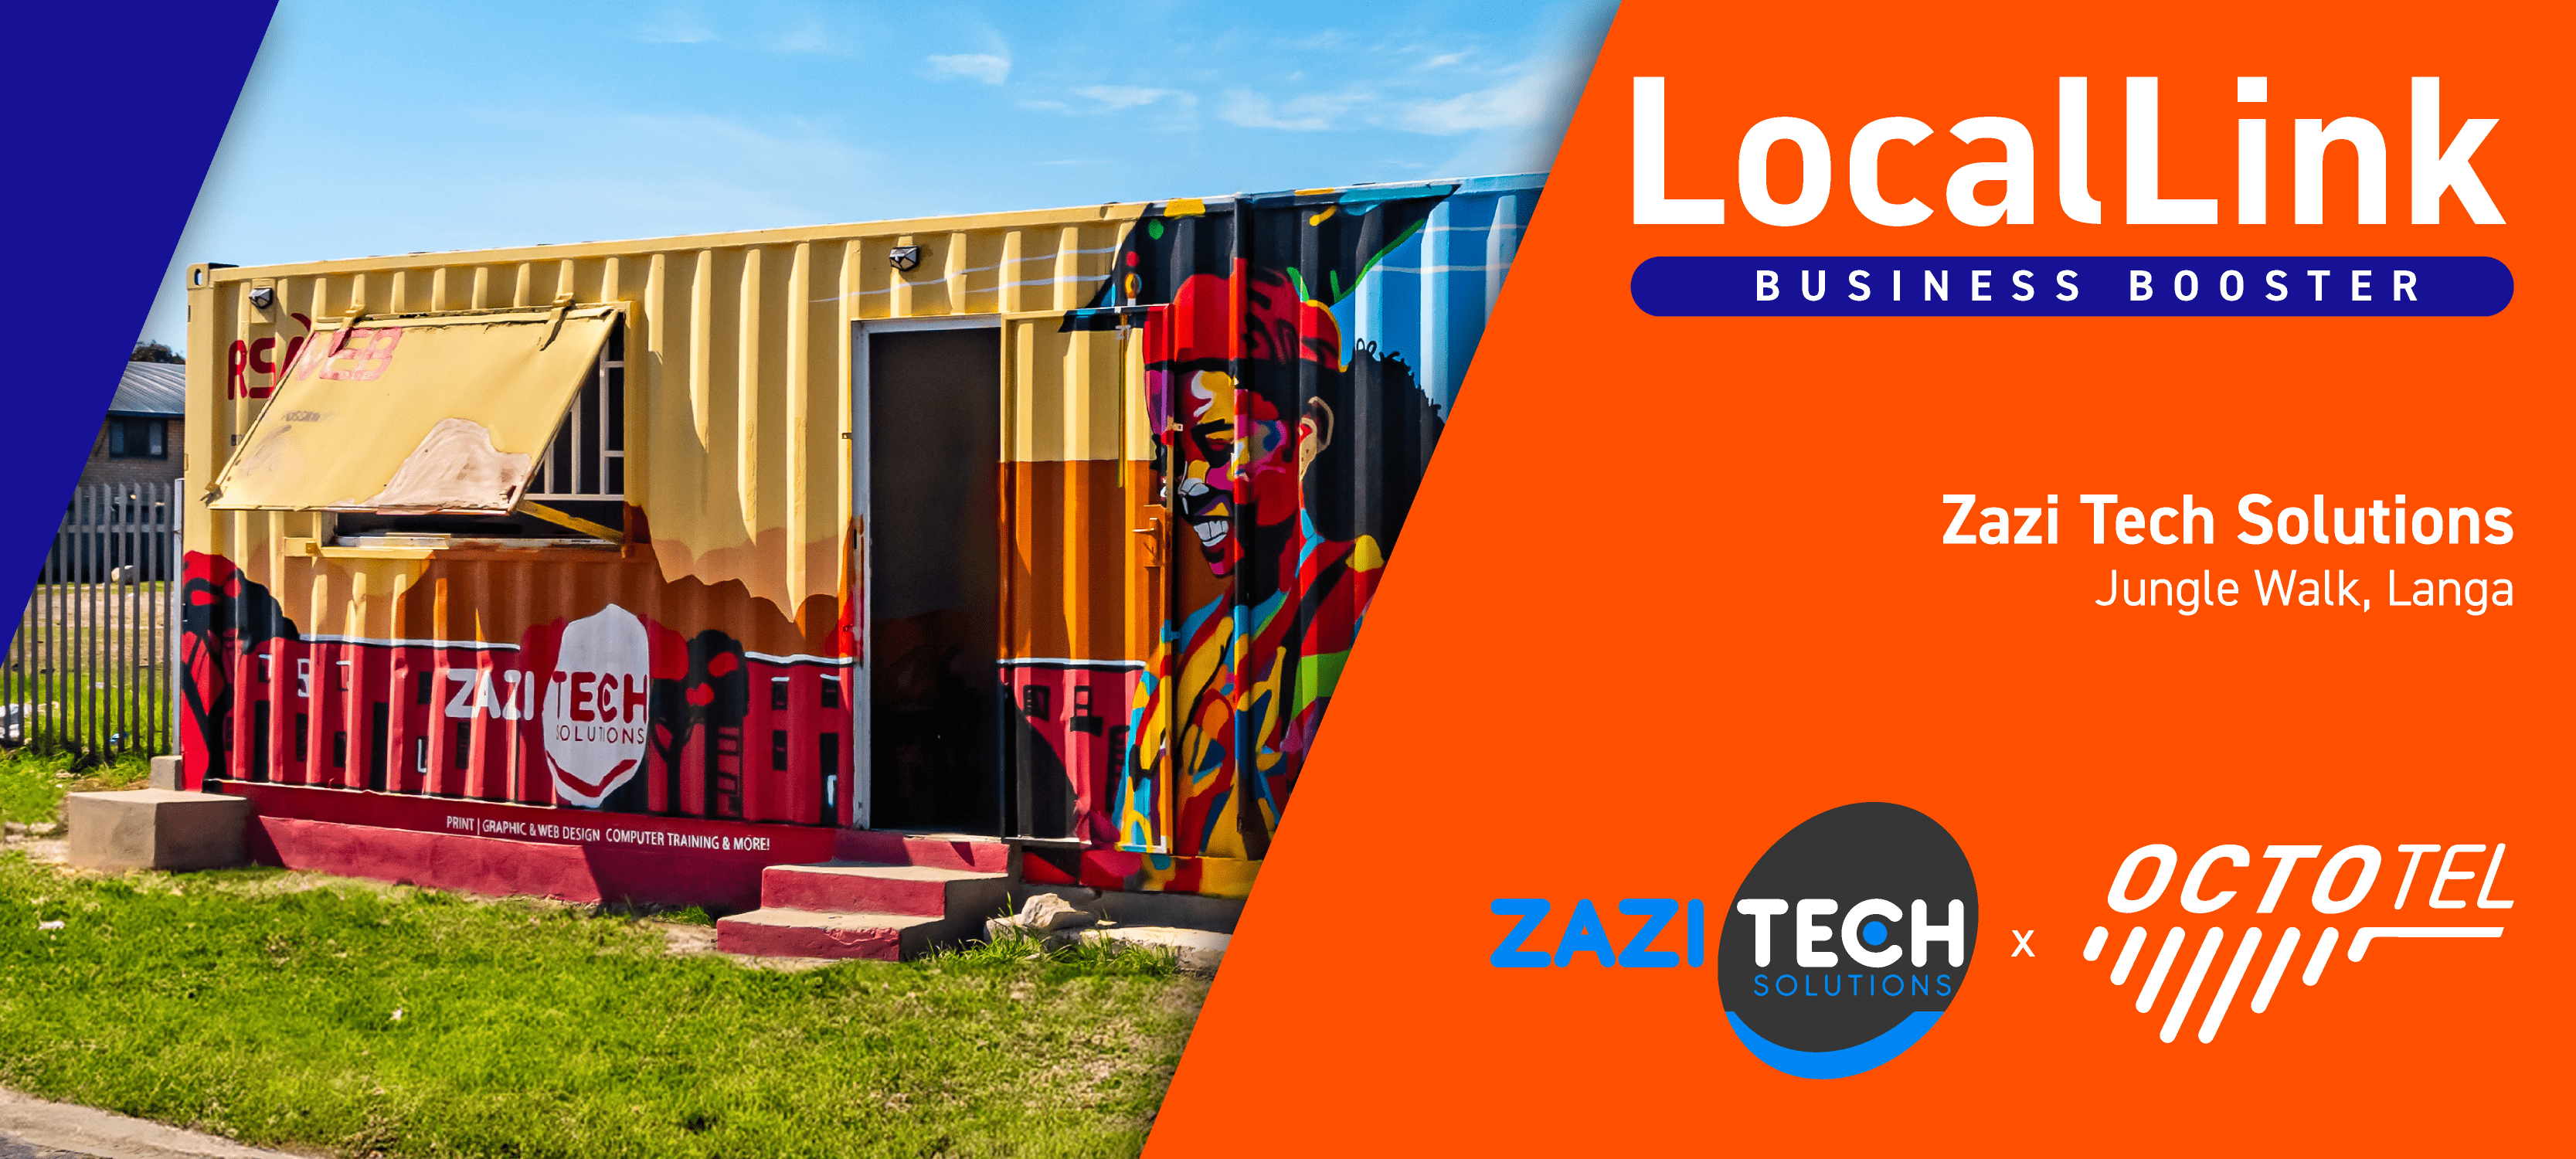 OCTOTEL LOCAL LINK SPOTLIGHT. ZAZI TECH SOLUTIONS: EMPOWERING THE TOWNSHIP THROUGH TECHNOLOGY.